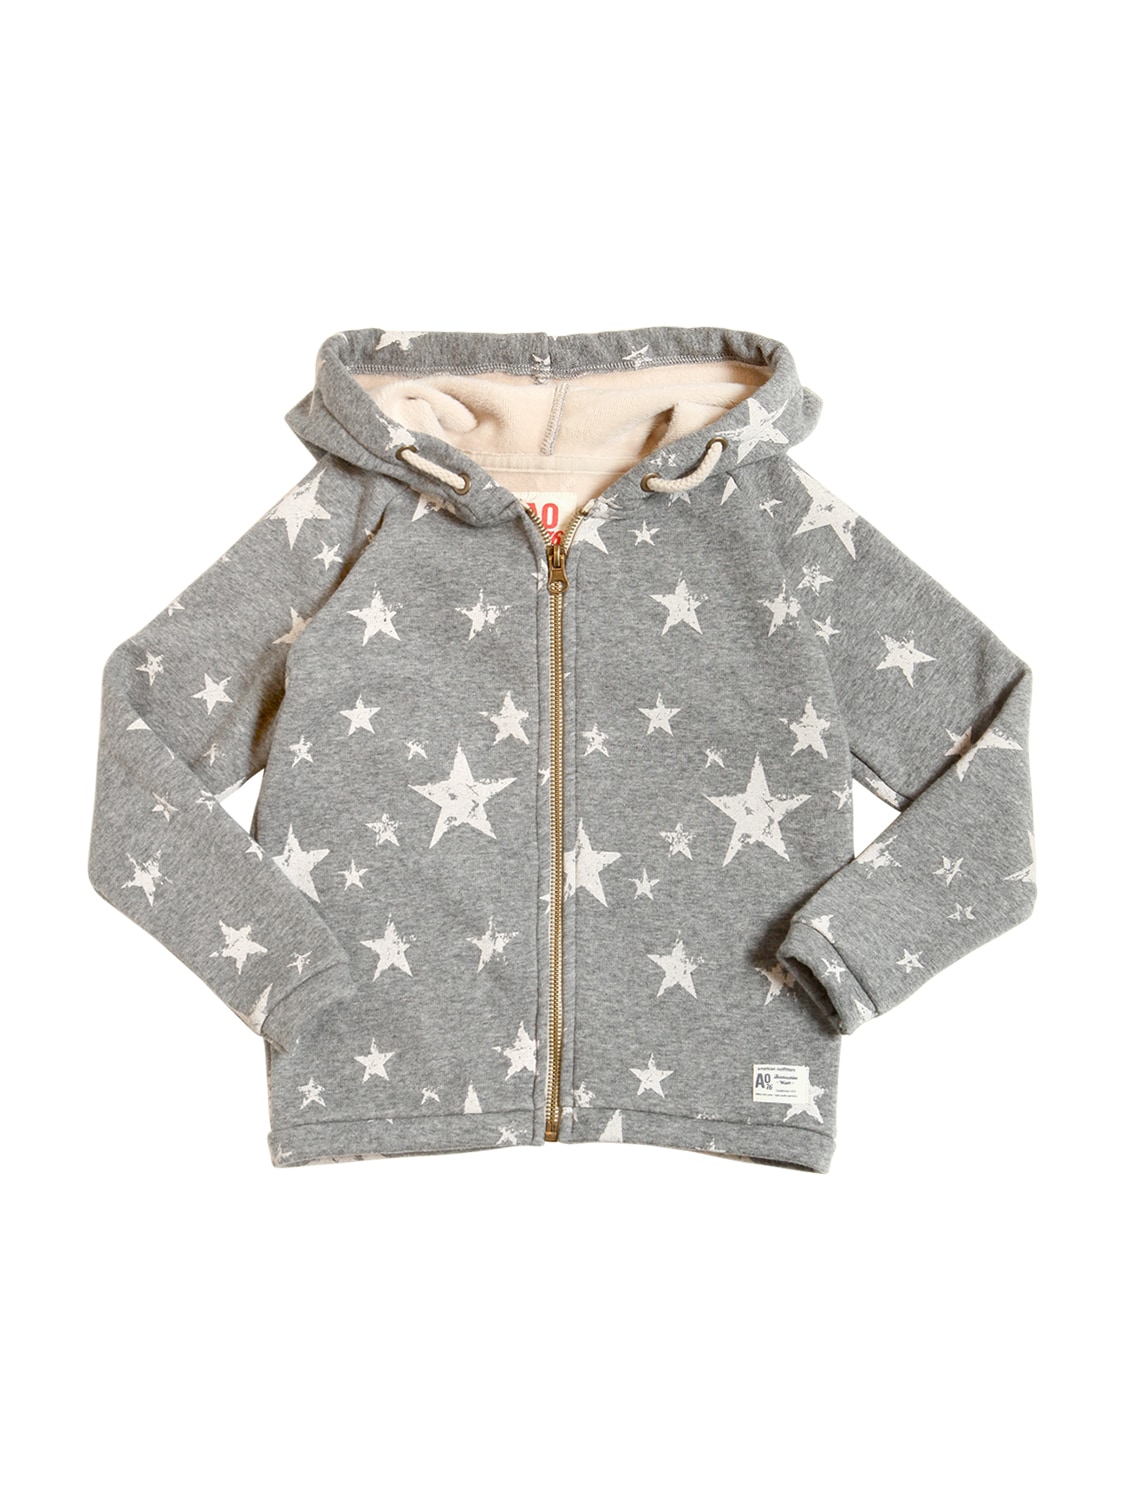 American Outfitters Kids' Hooded Stars Print Cotton Sweatshirt In Grey